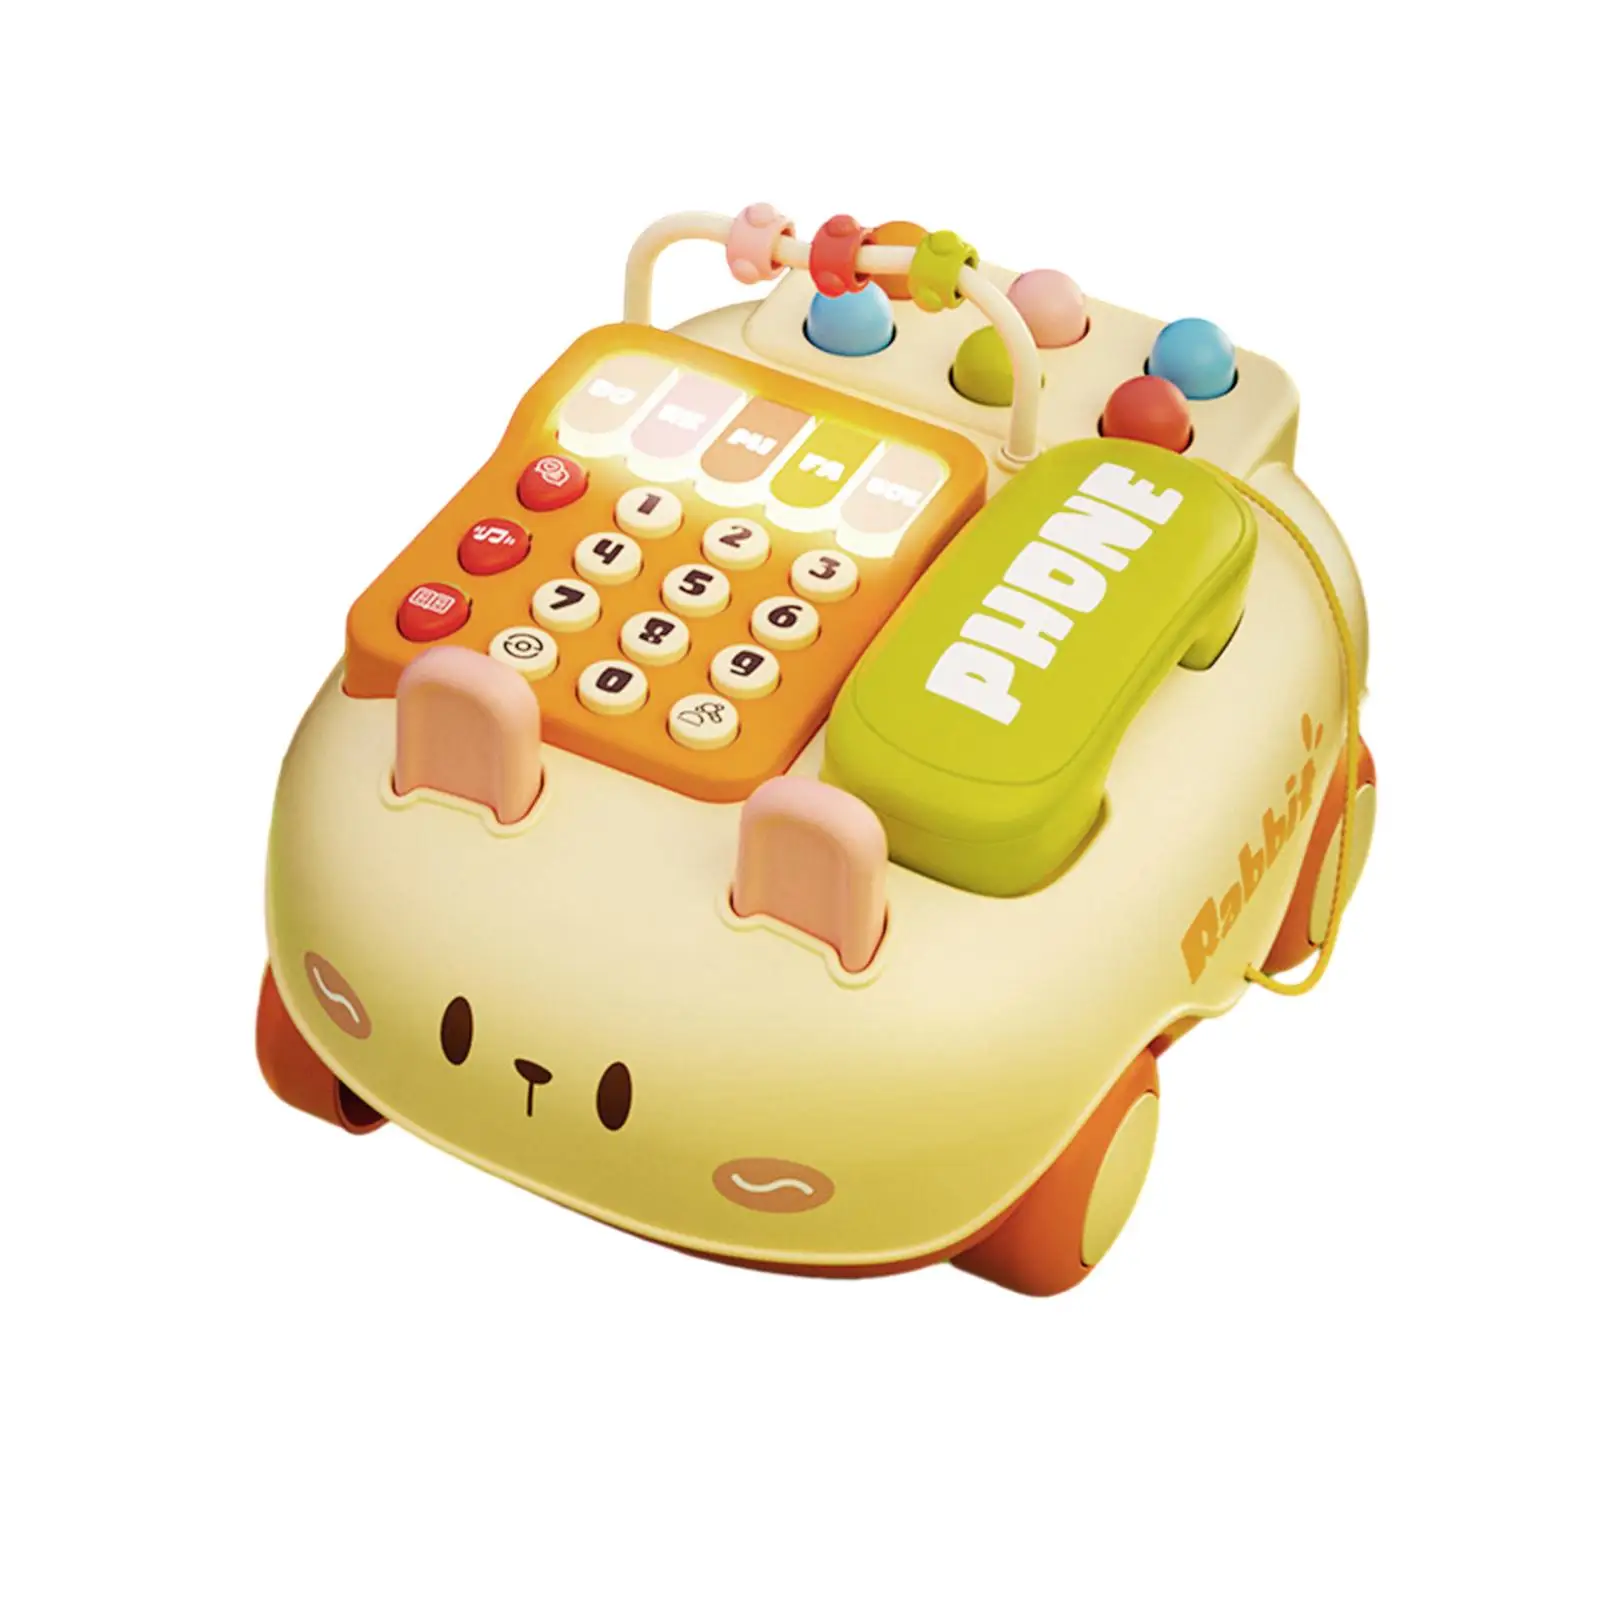 Baby Telephone Toy Intelligence Multifunction Educational Toy Telephone Pretend Phone for Boys Children Toddler Holiday Gift